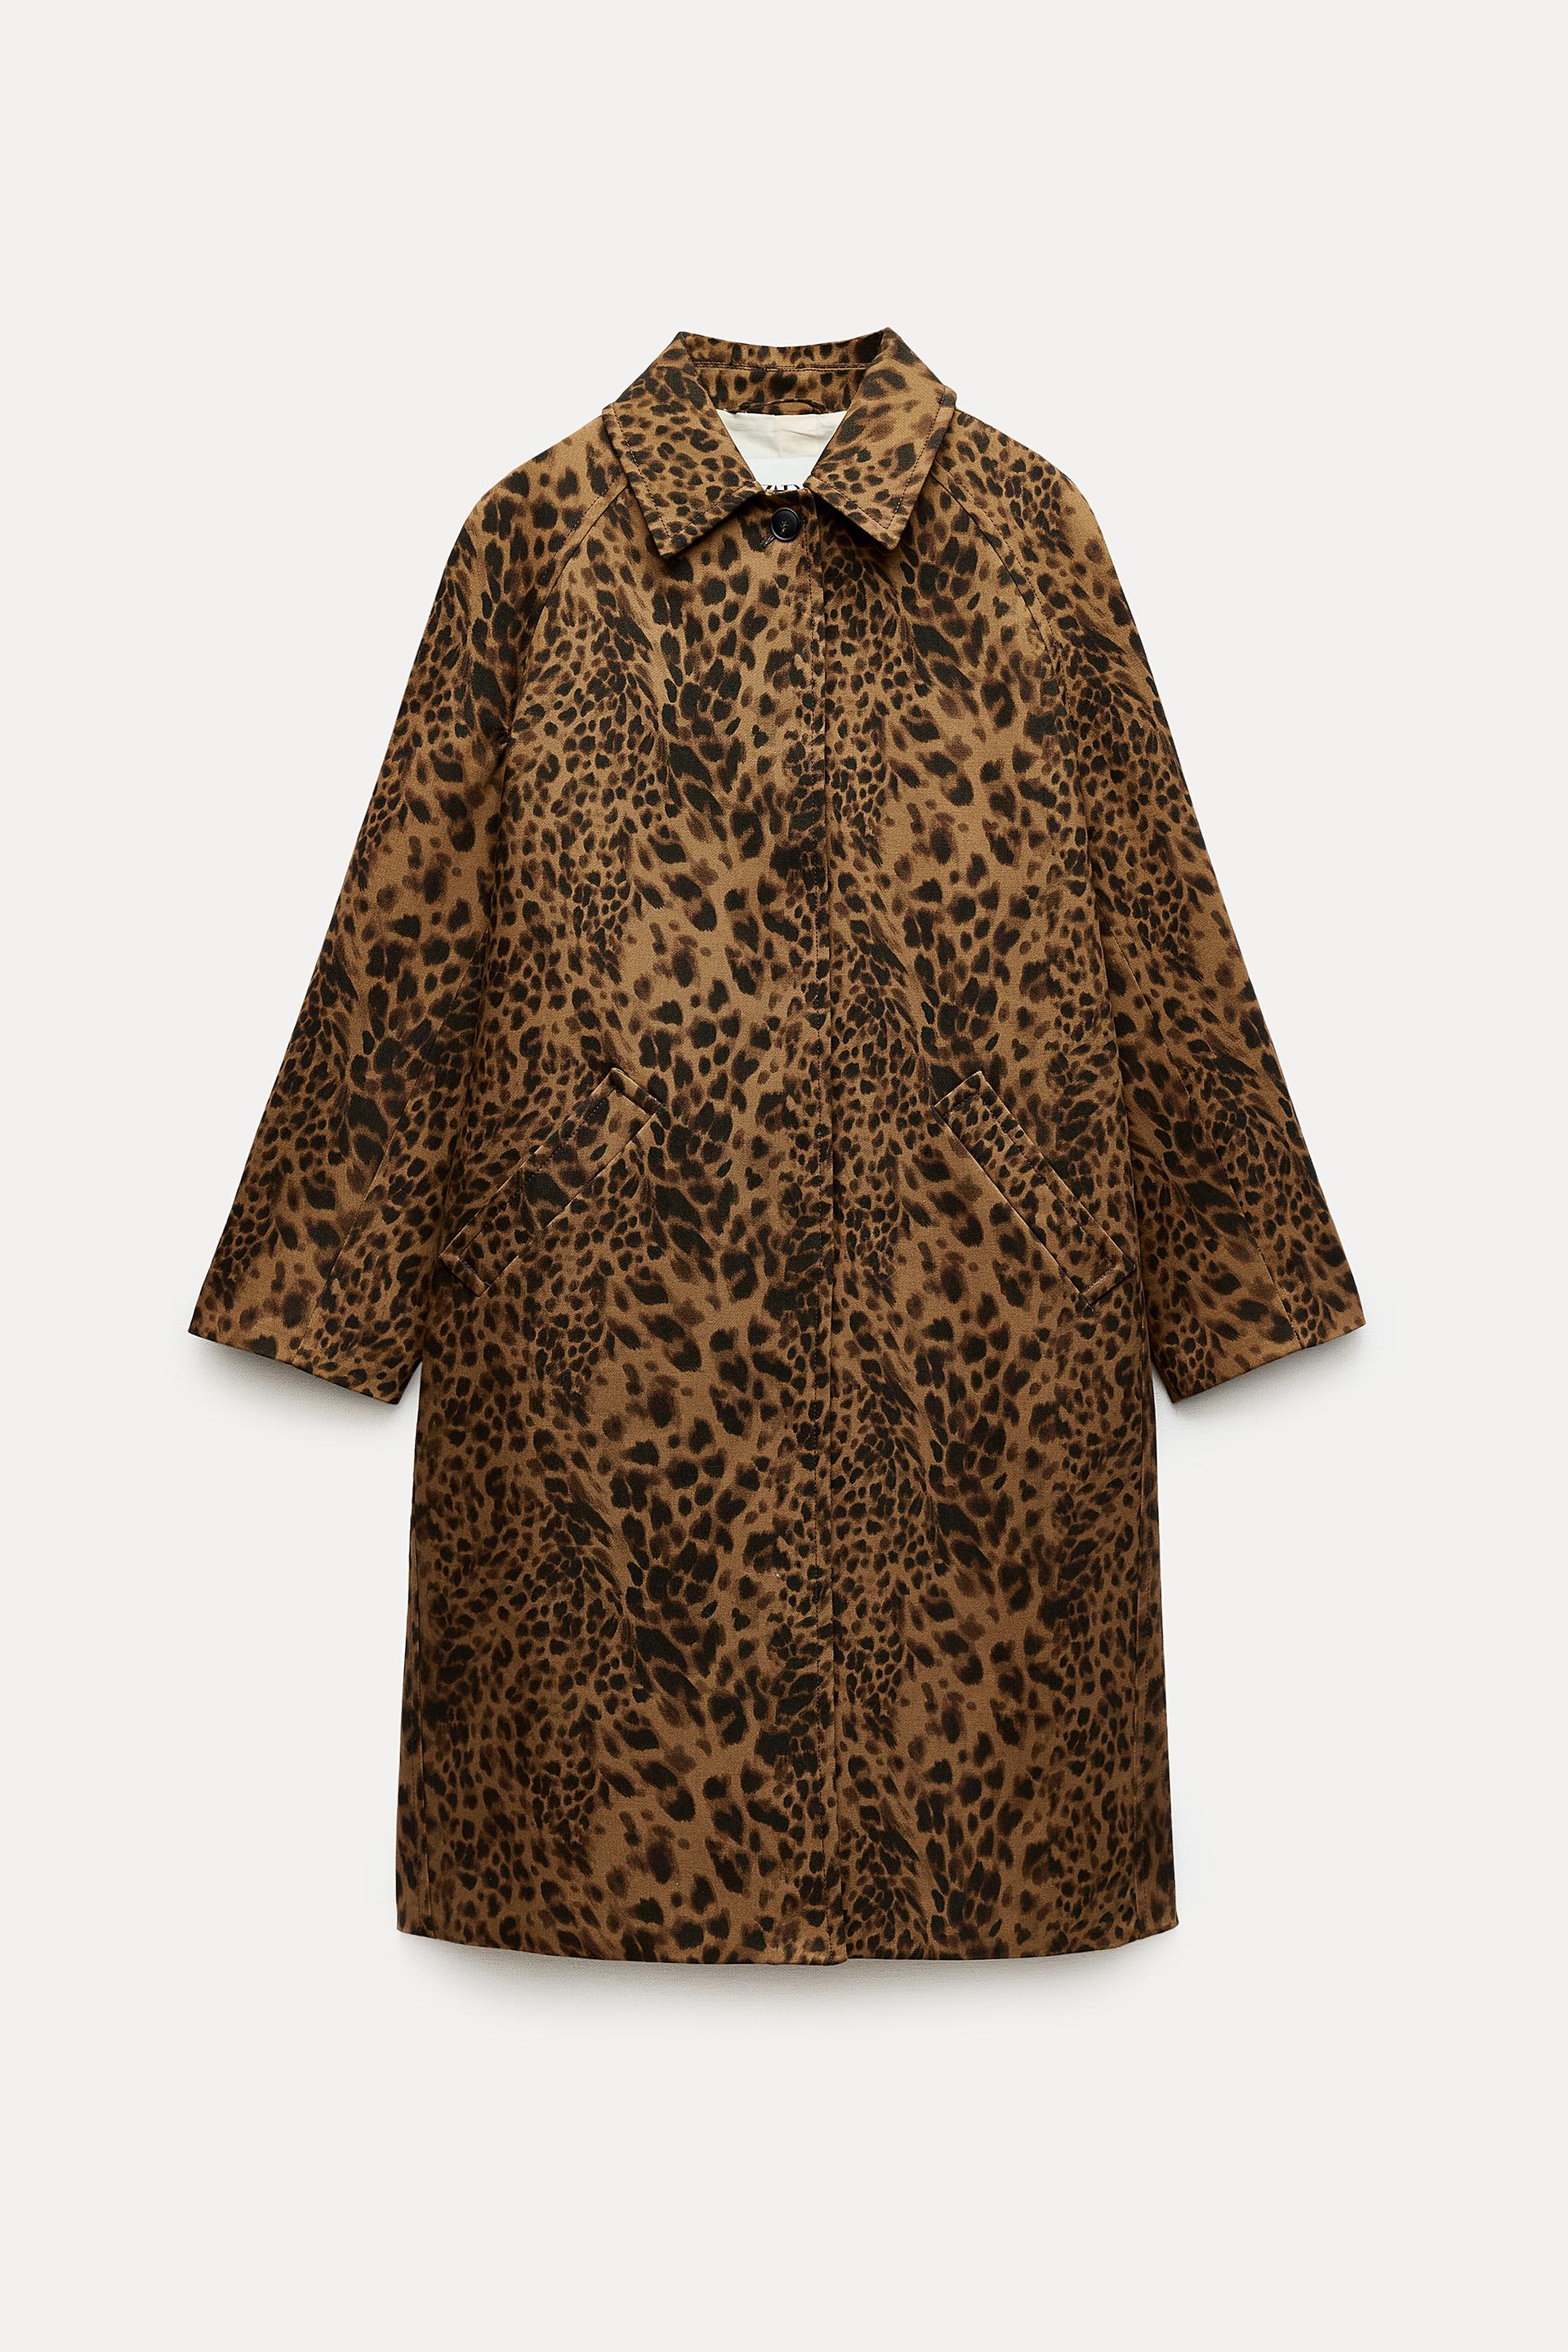 Zw Collection Animal Print Trench Coat